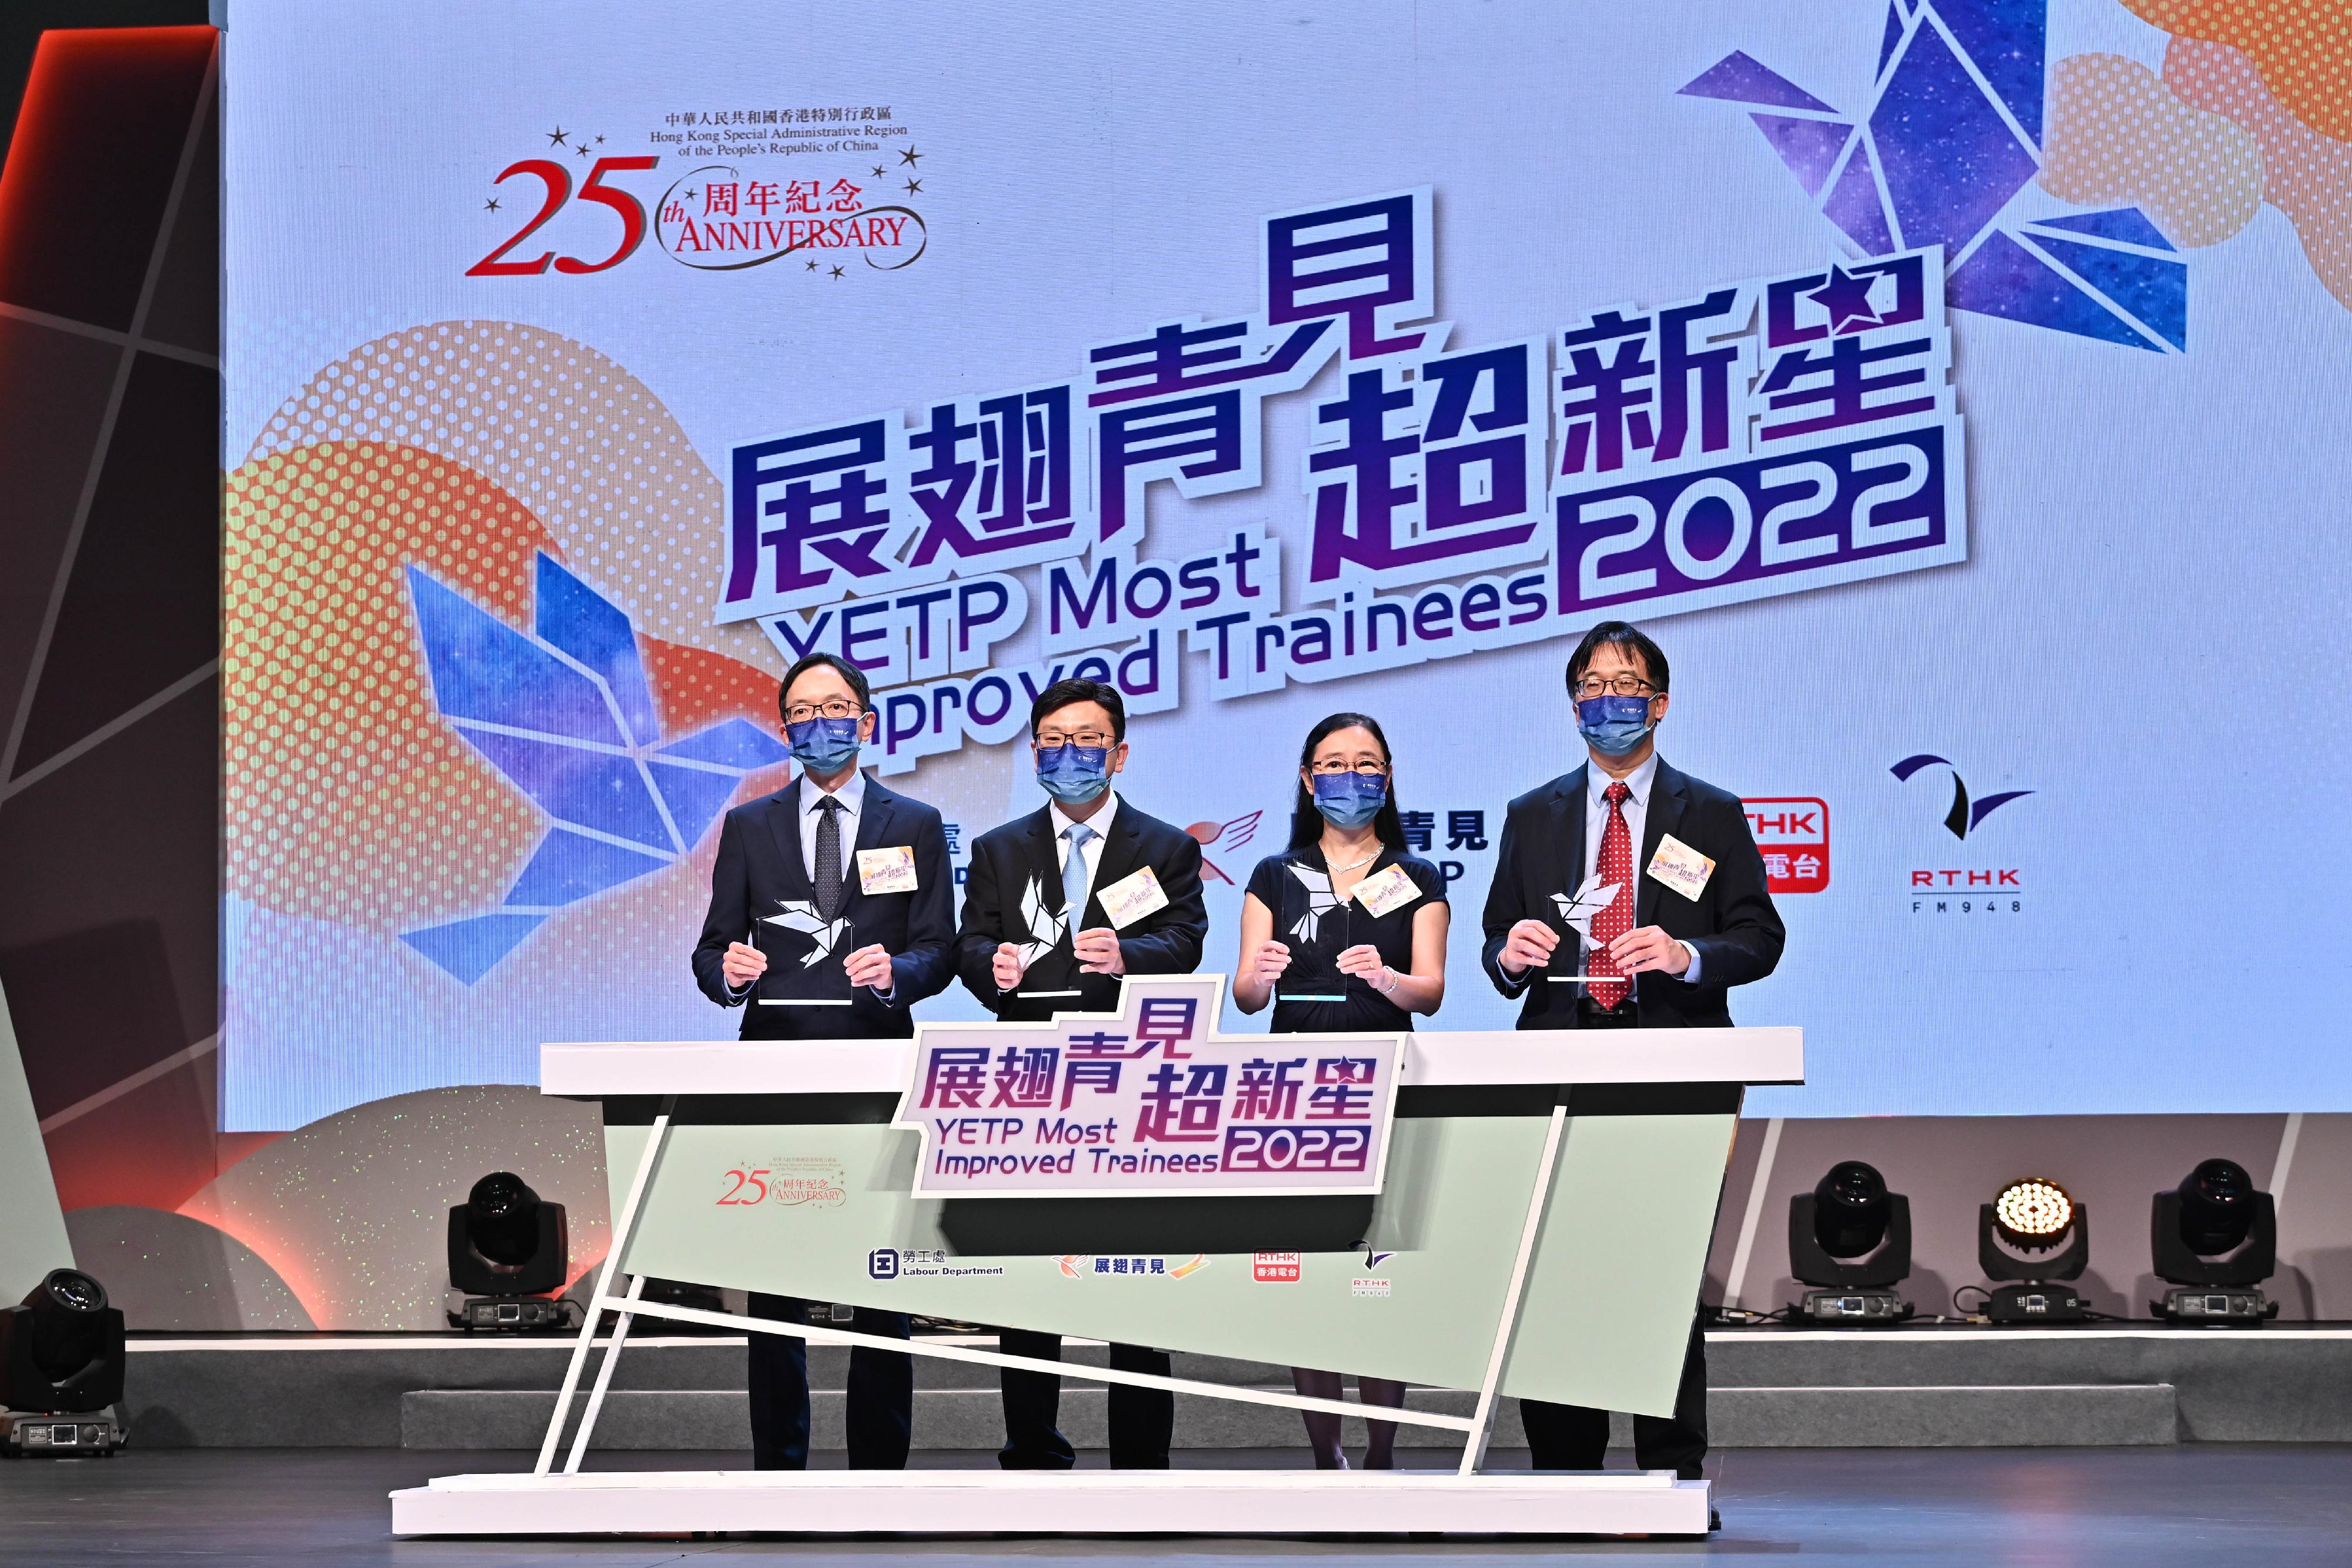 The Award Ceremony of Most Improved Trainees of the Youth Employment and Training Programme 2022 was held at Queen Elizabeth Stadium this evening (August 26). Photo shows the Secretary for Labour and Welfare, Mr Chris Sun (second left); the Permanent Secretary for Labour and Welfare, Ms Alice Lau (second right); the Acting Director of Broadcasting, Mr Raymond Sy (first left); and the Deputy Commissioner for Labour (Labour Administration), Mr Raymond Ho (first right), officiating at the opening ceremony.